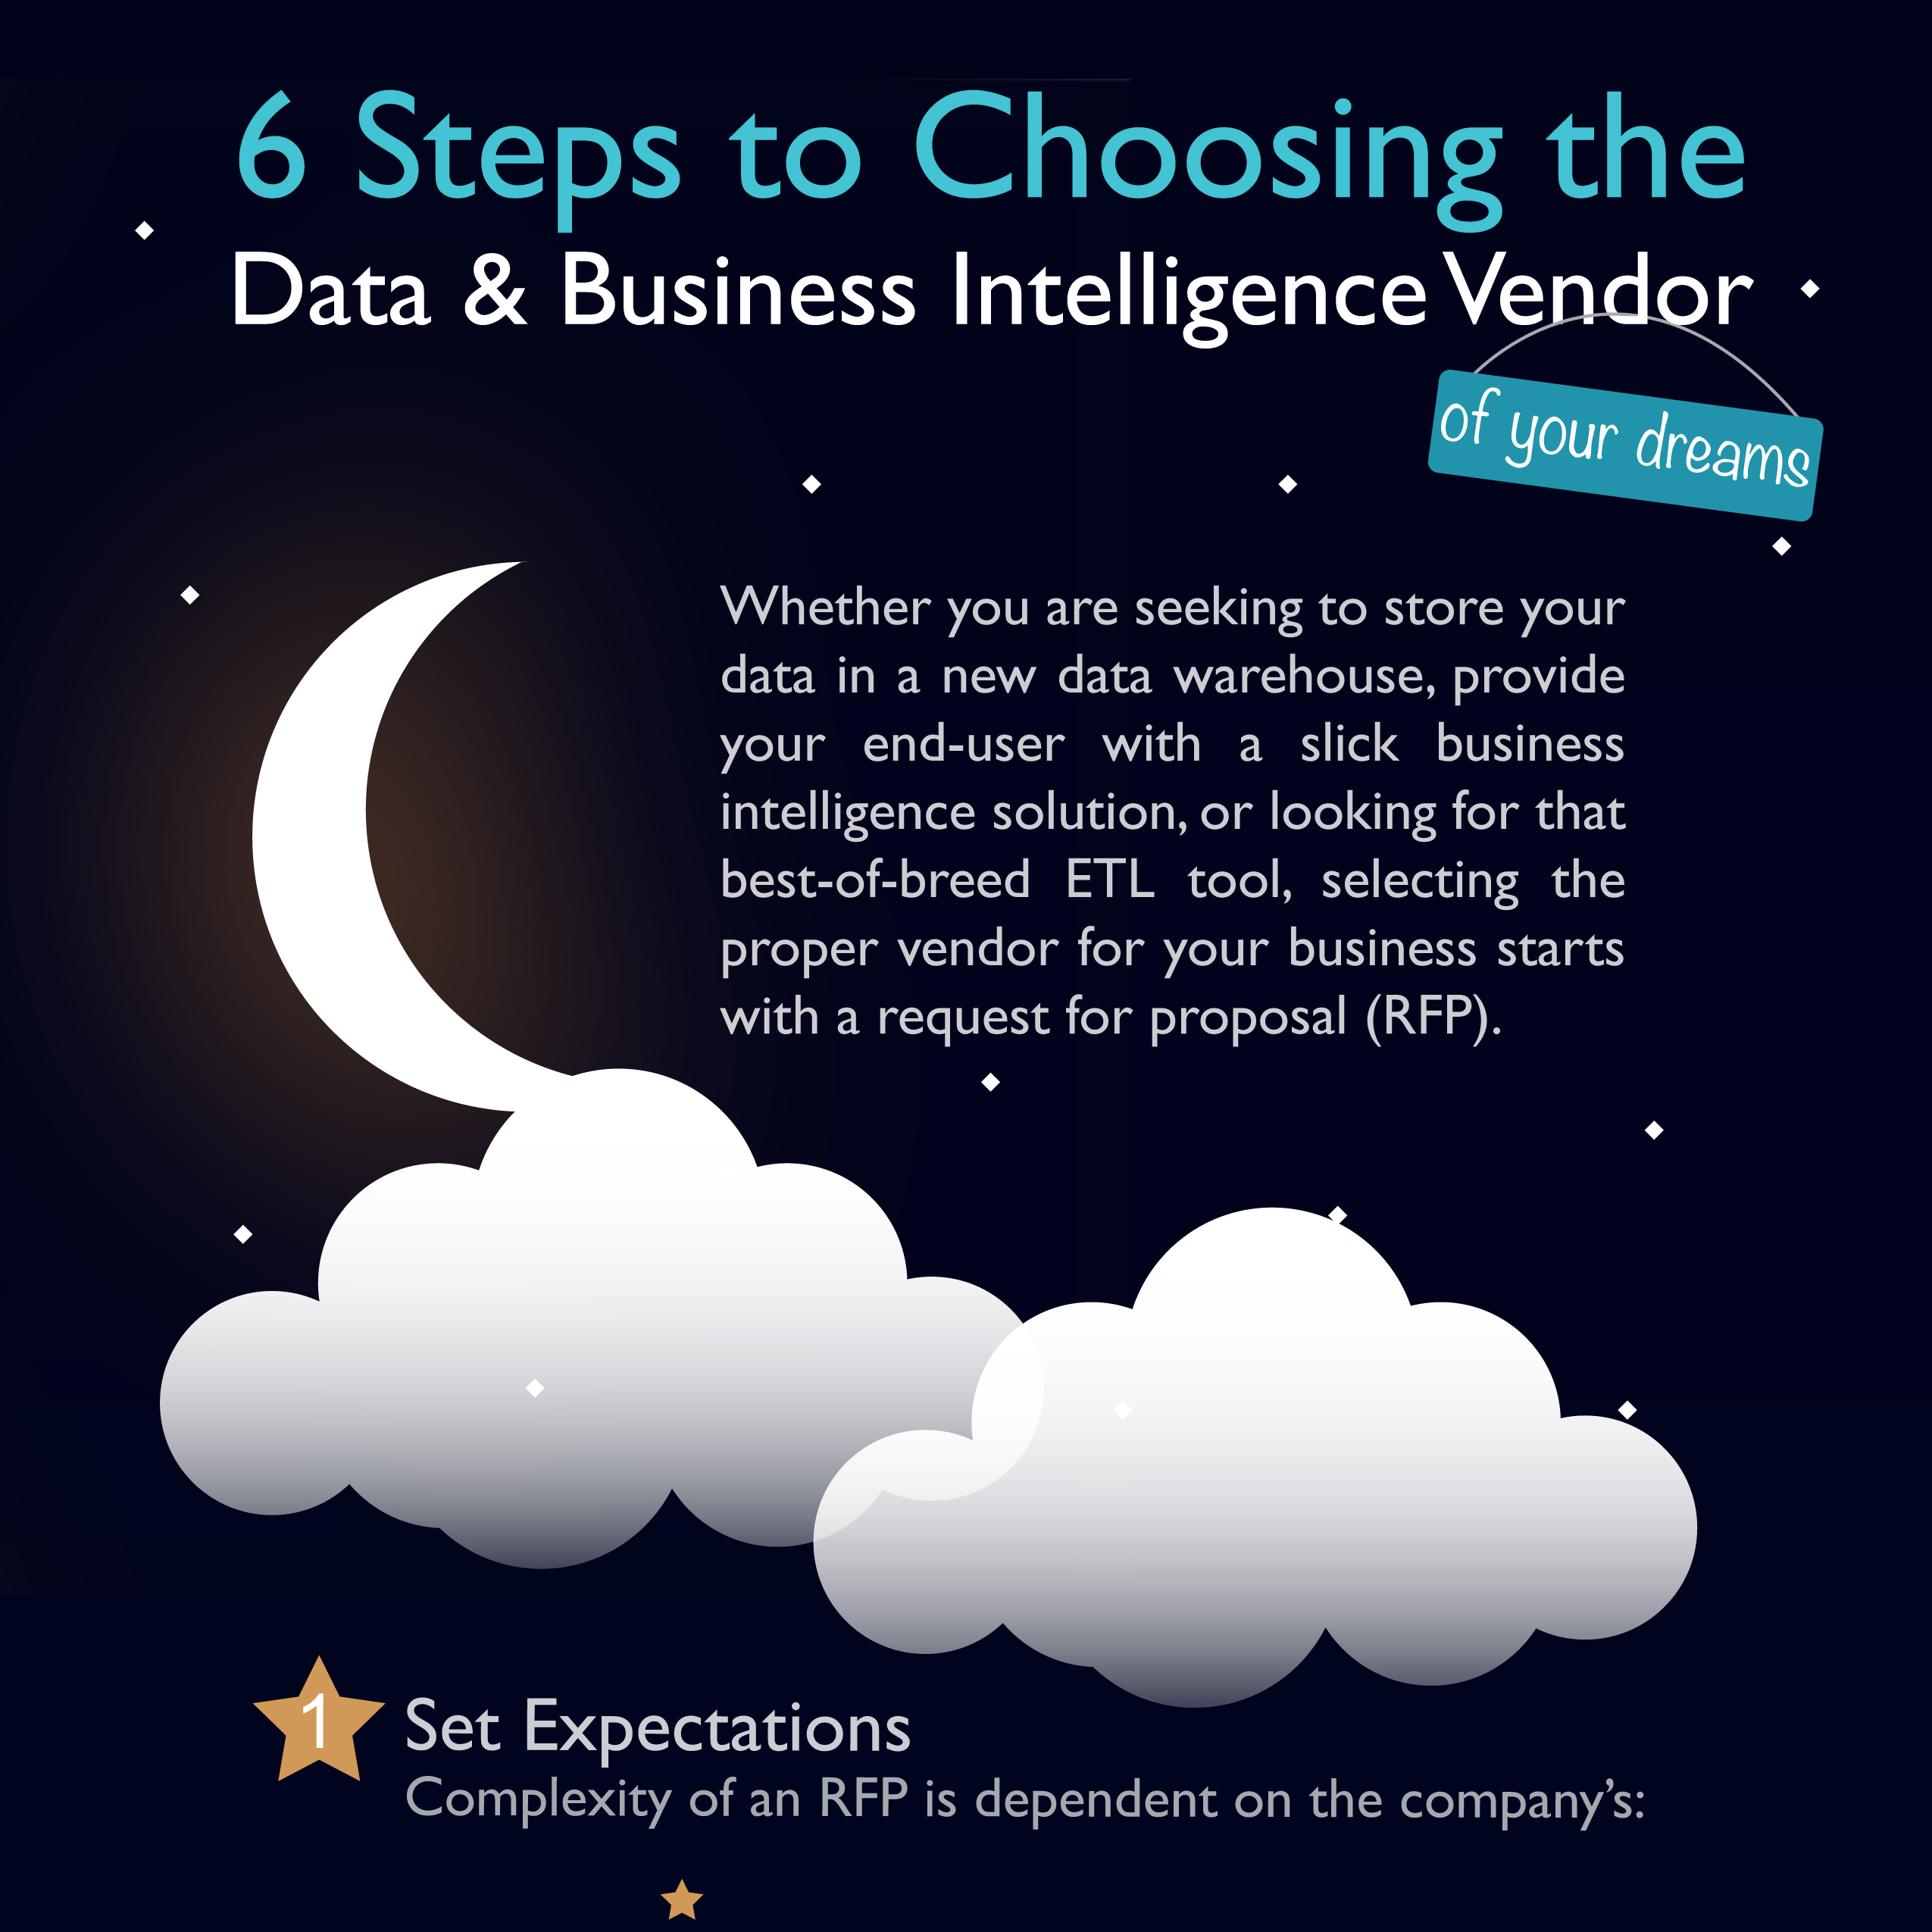 6 steps to choosing the data & business intelligence vendor of your dreams